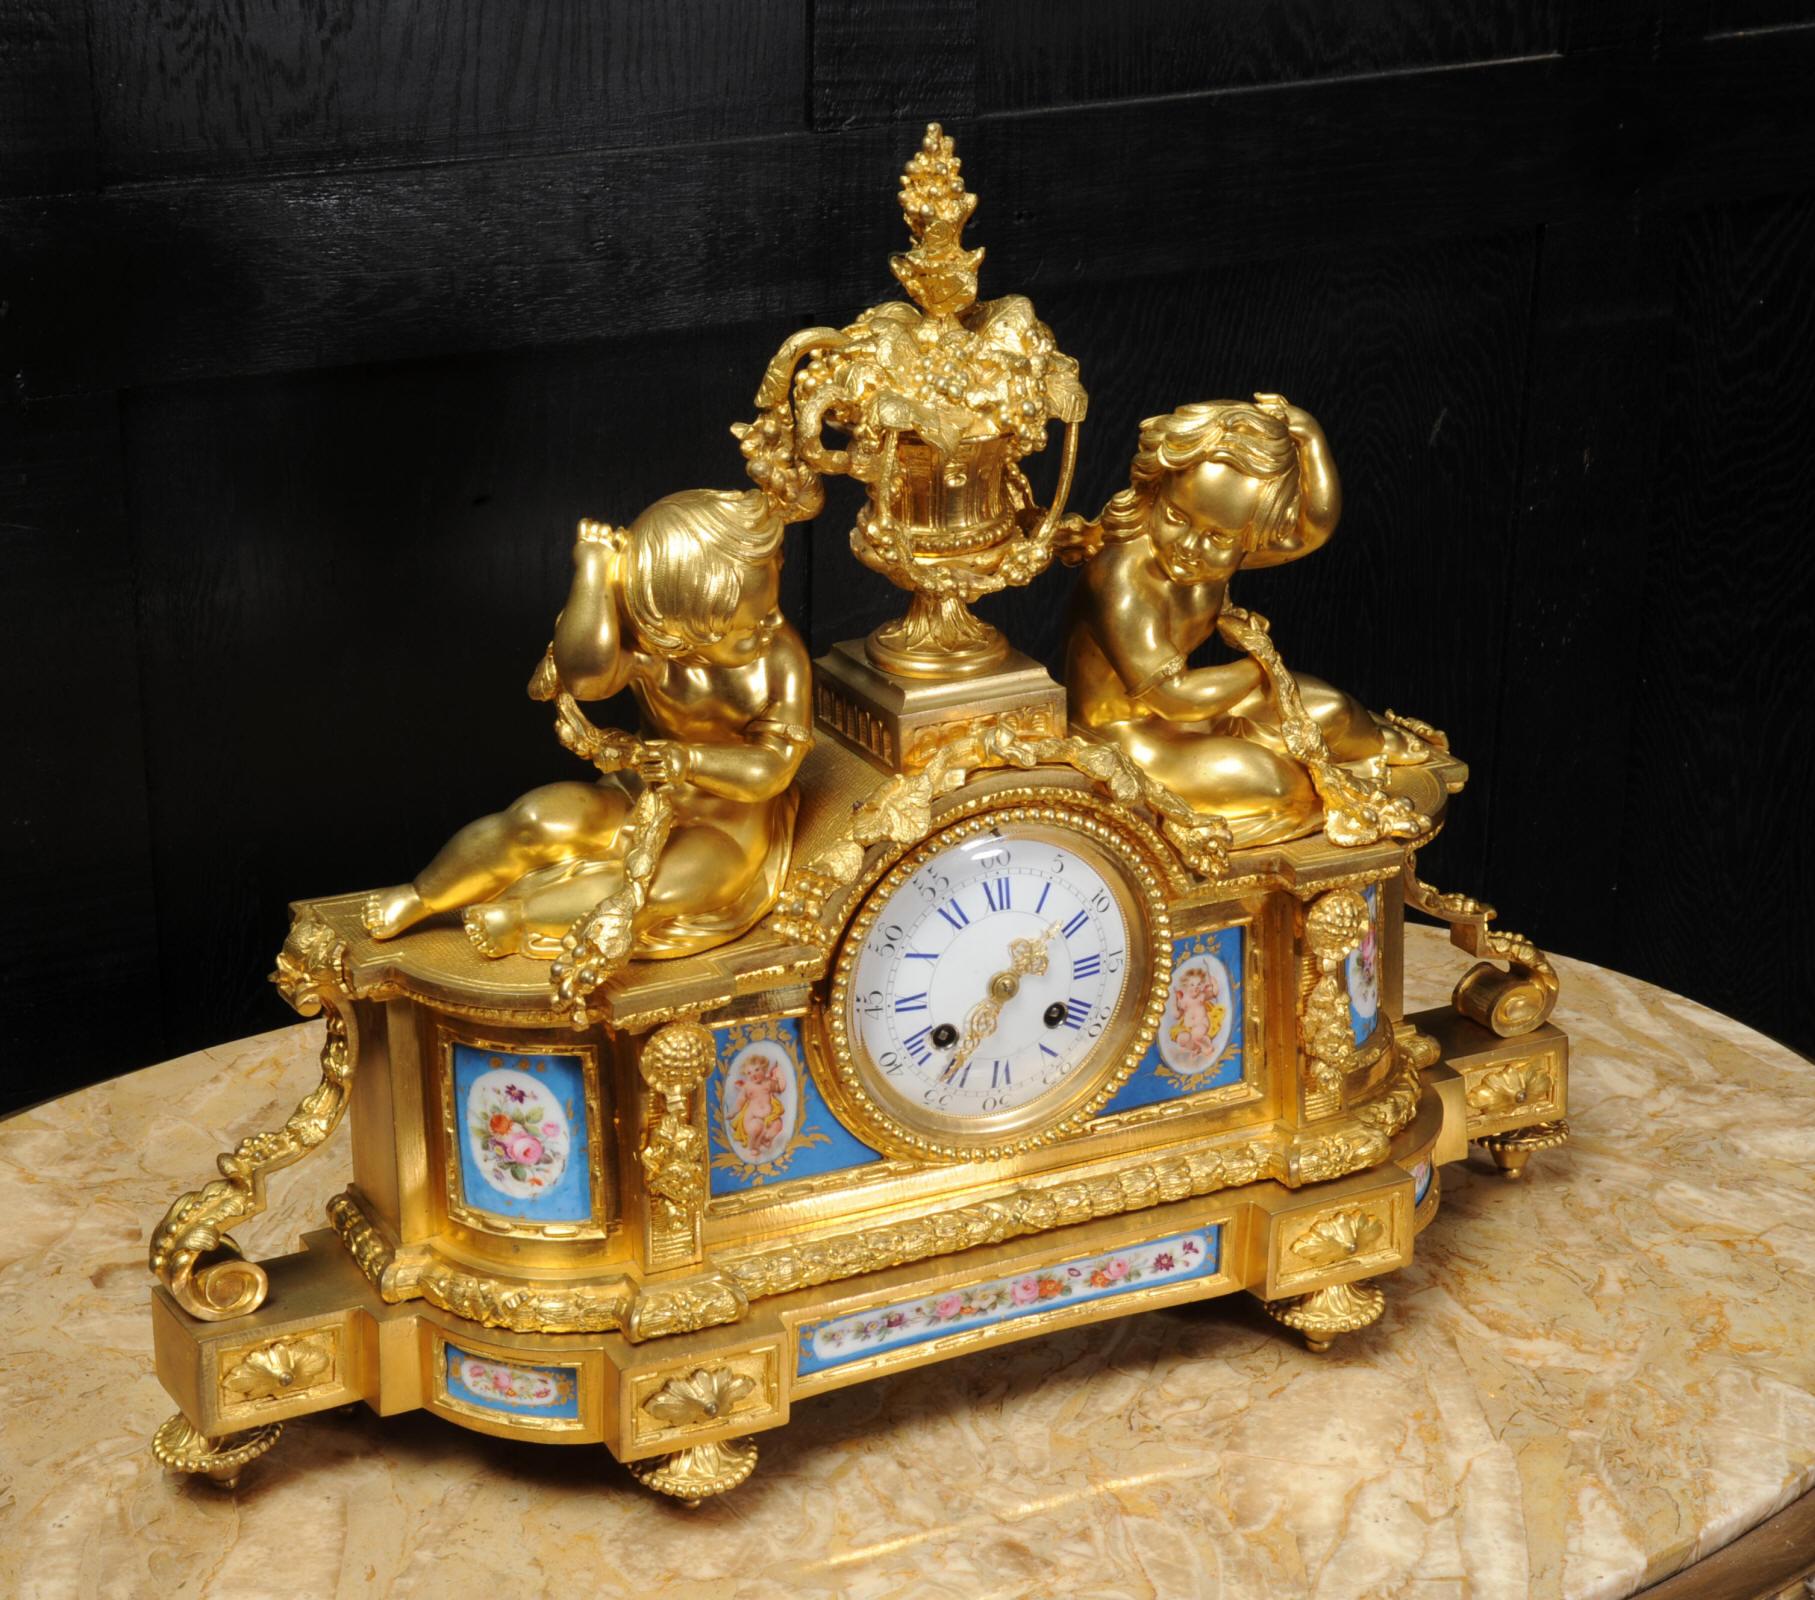 19th Century Large Ormolu and Sèvres Porcelain Antique French Clock, Wine Grapes Cherubs